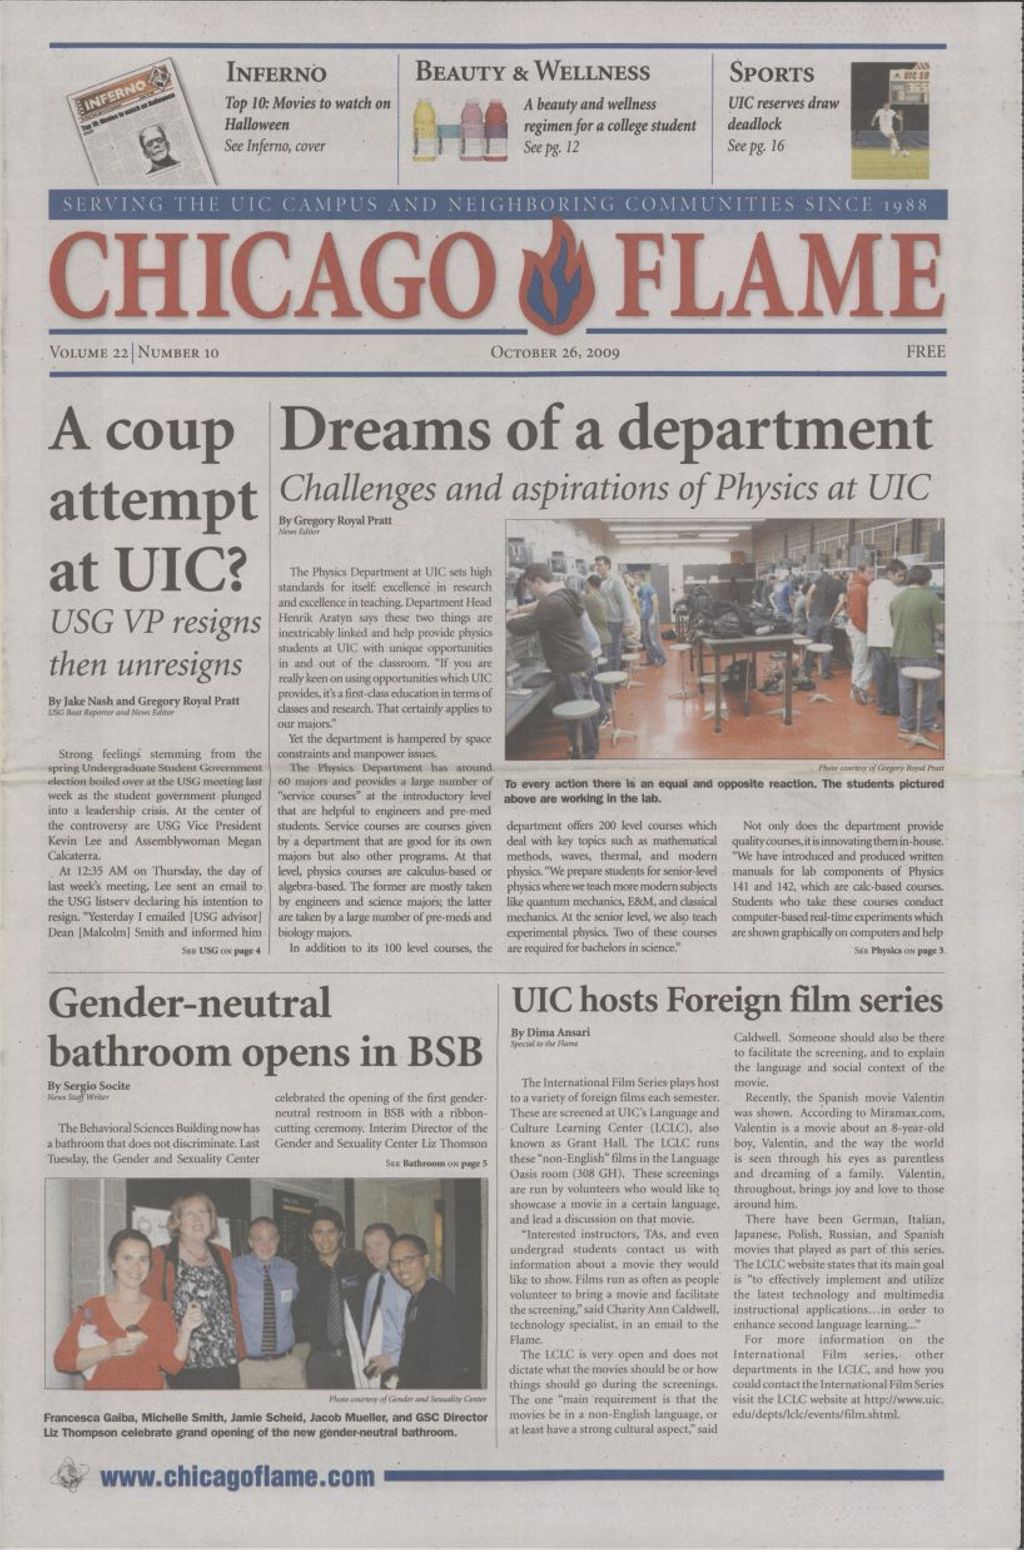 Miniature of Chicago Flame (October 26, 2009)